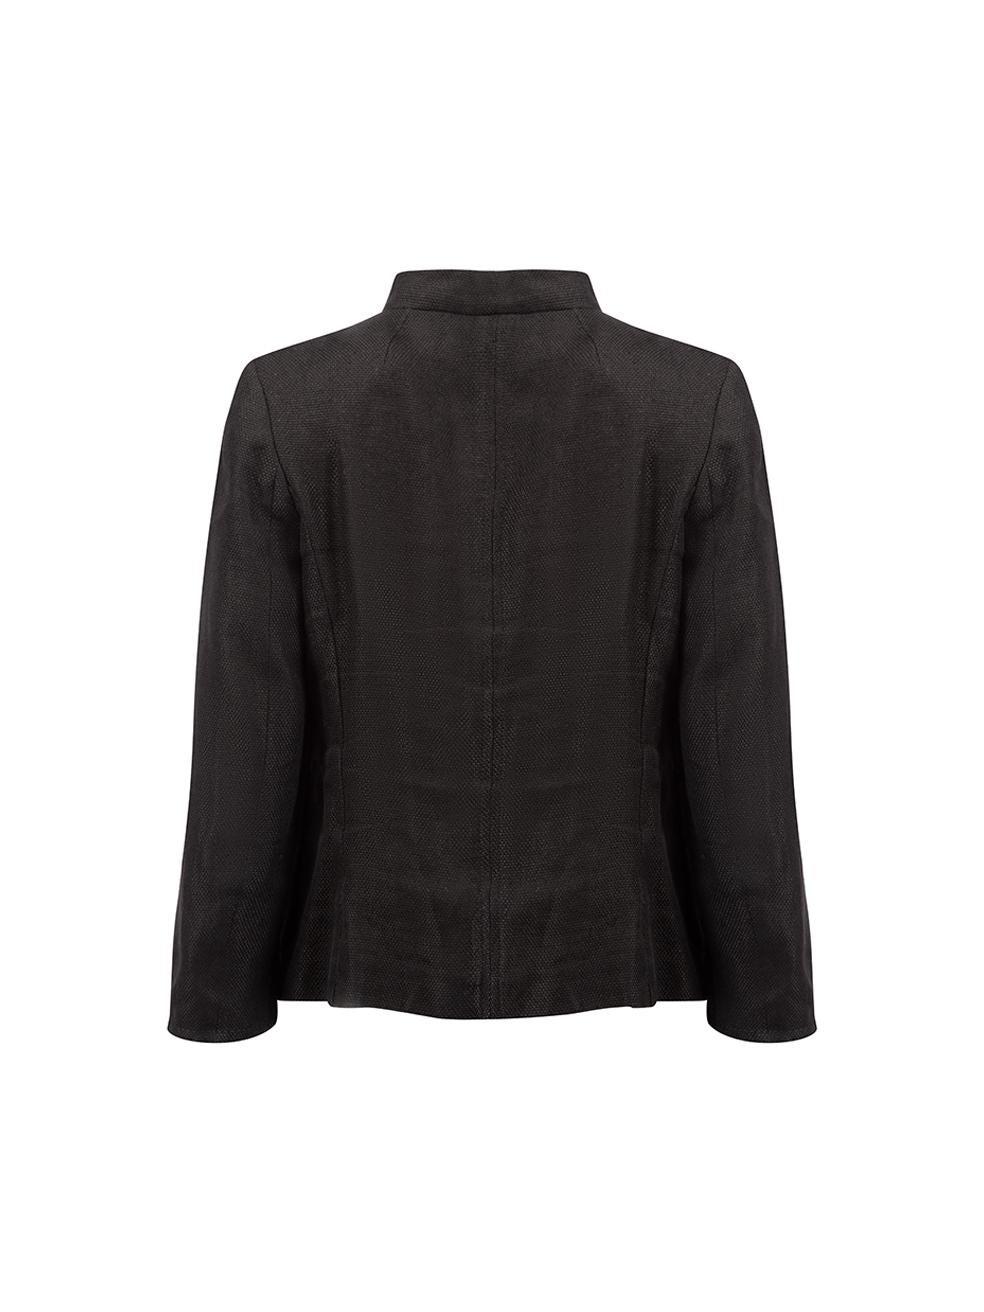 S Max Mara Black Woven Button Down Jacket Size M In Good Condition For Sale In London, GB